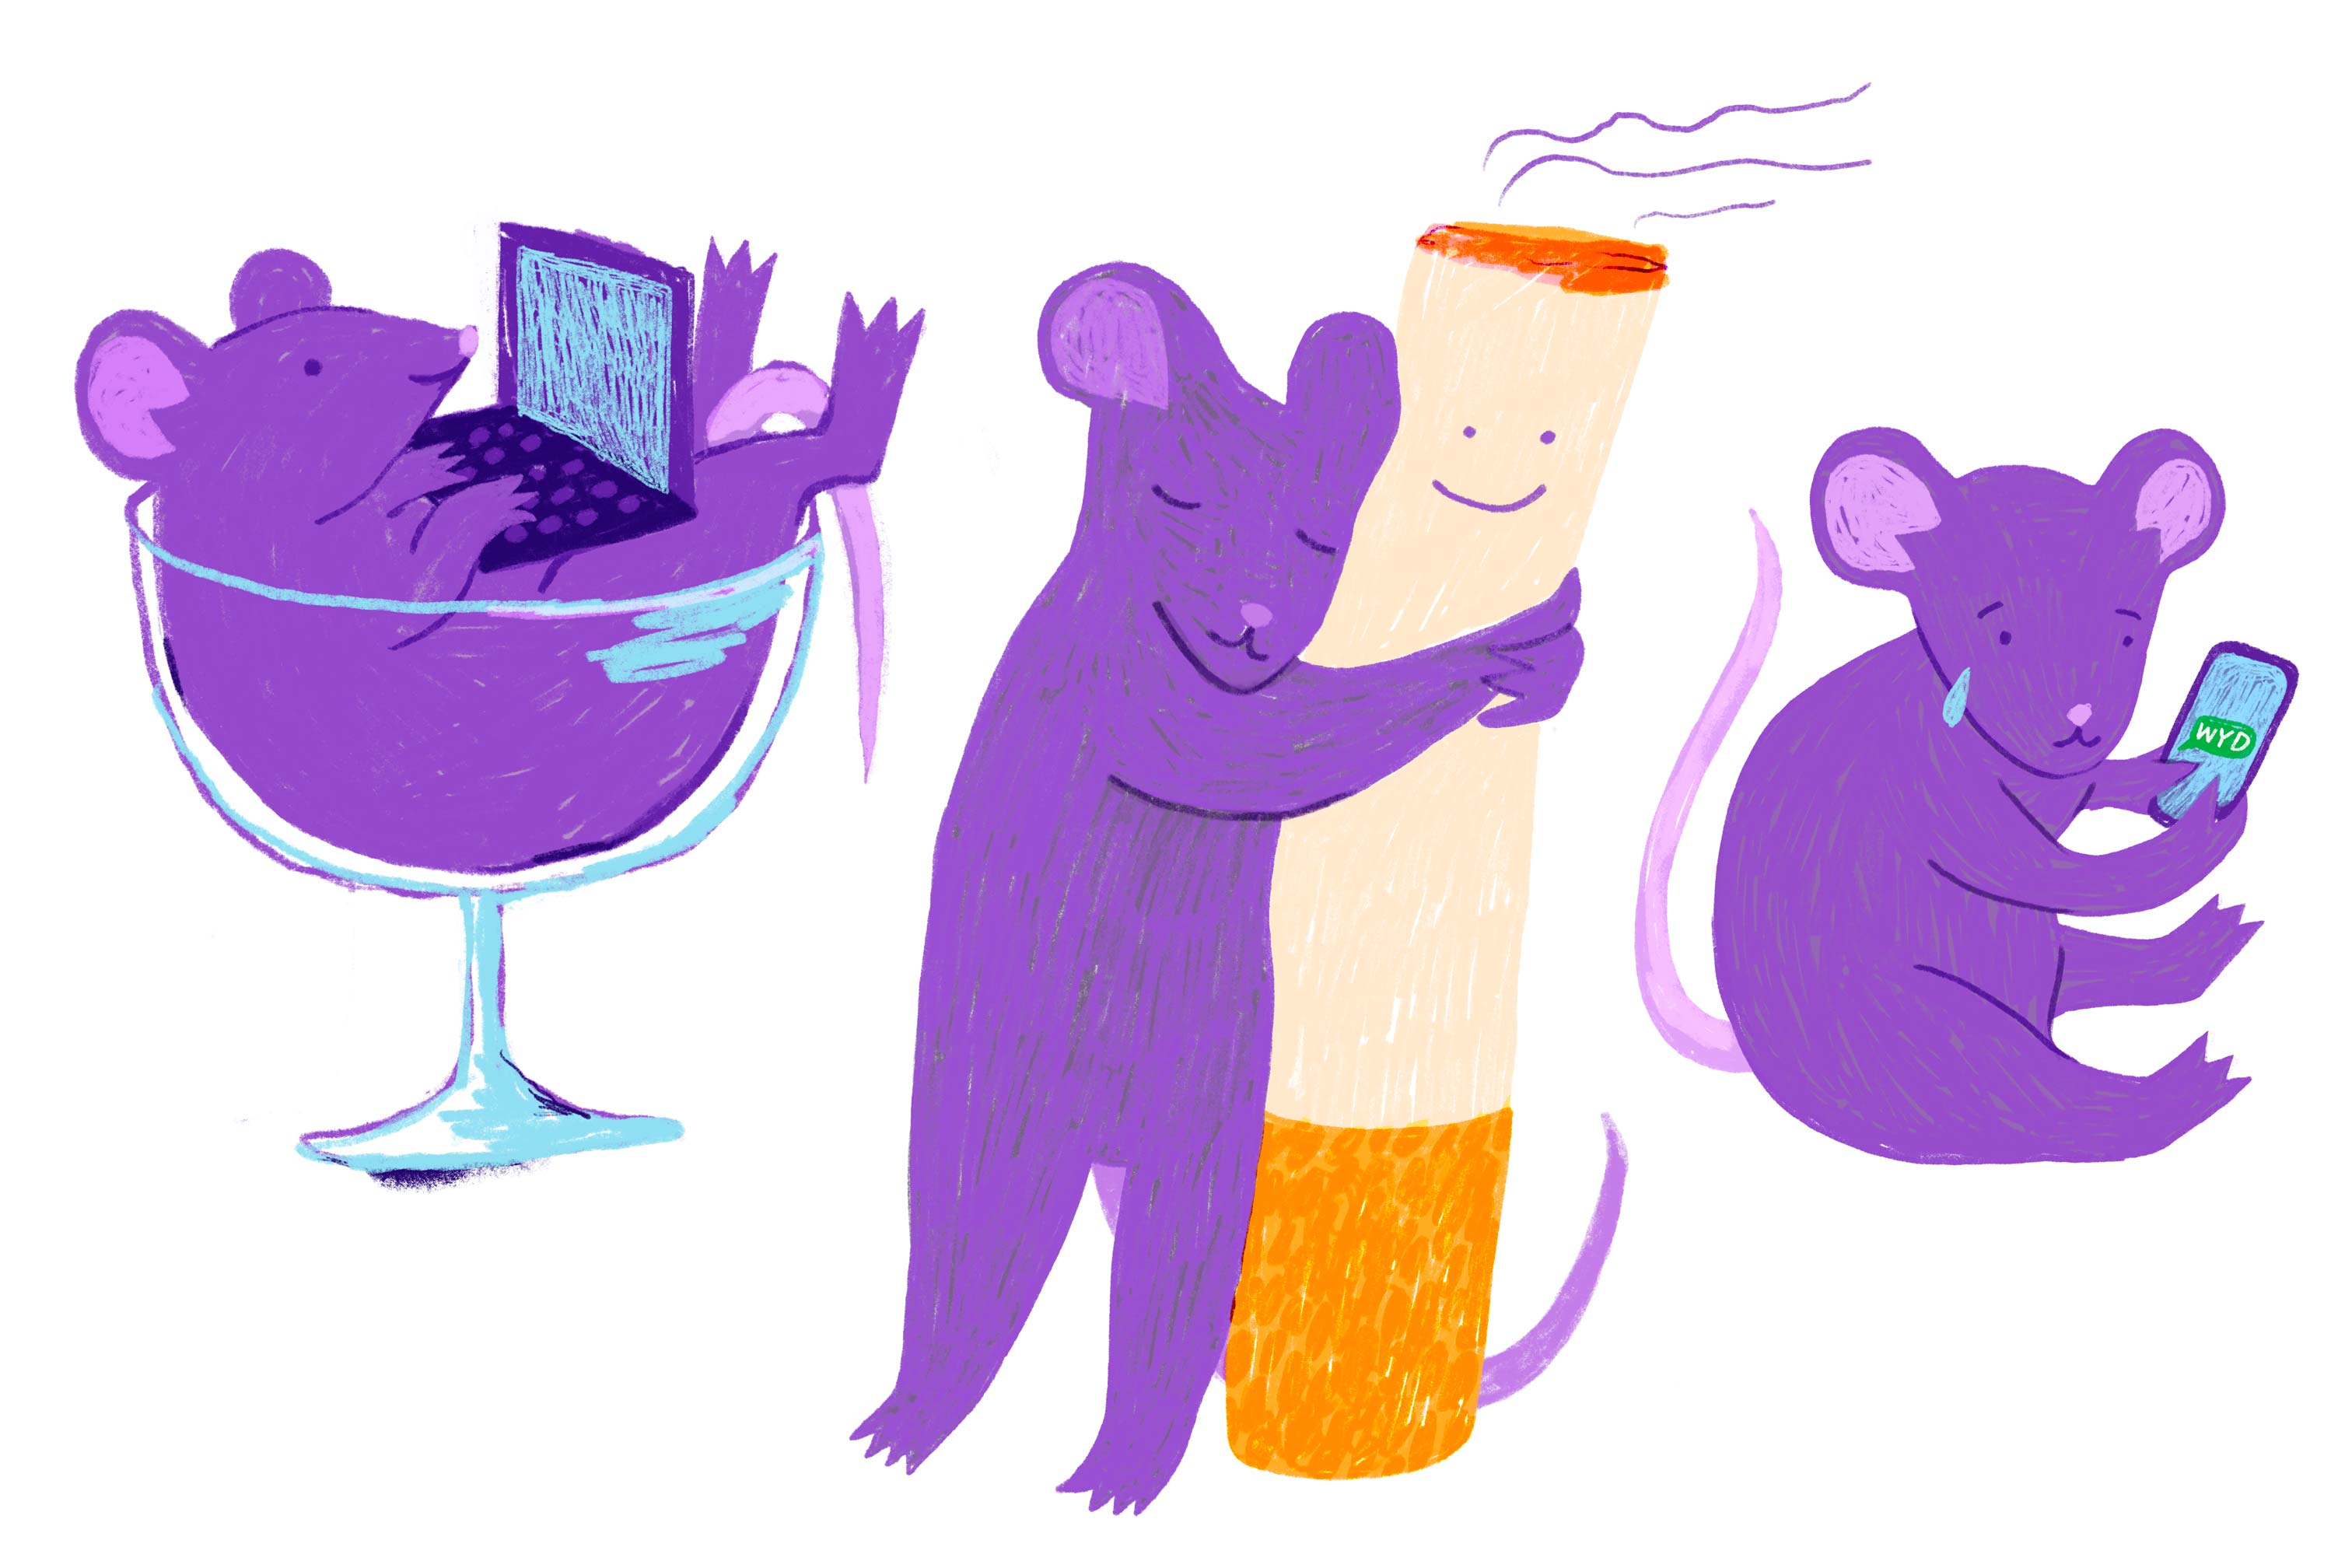 (Year of the) rat embracing vices, like occasionally having a cigarette, drinking a glass of wine while working, and reading old text conversations from exes.